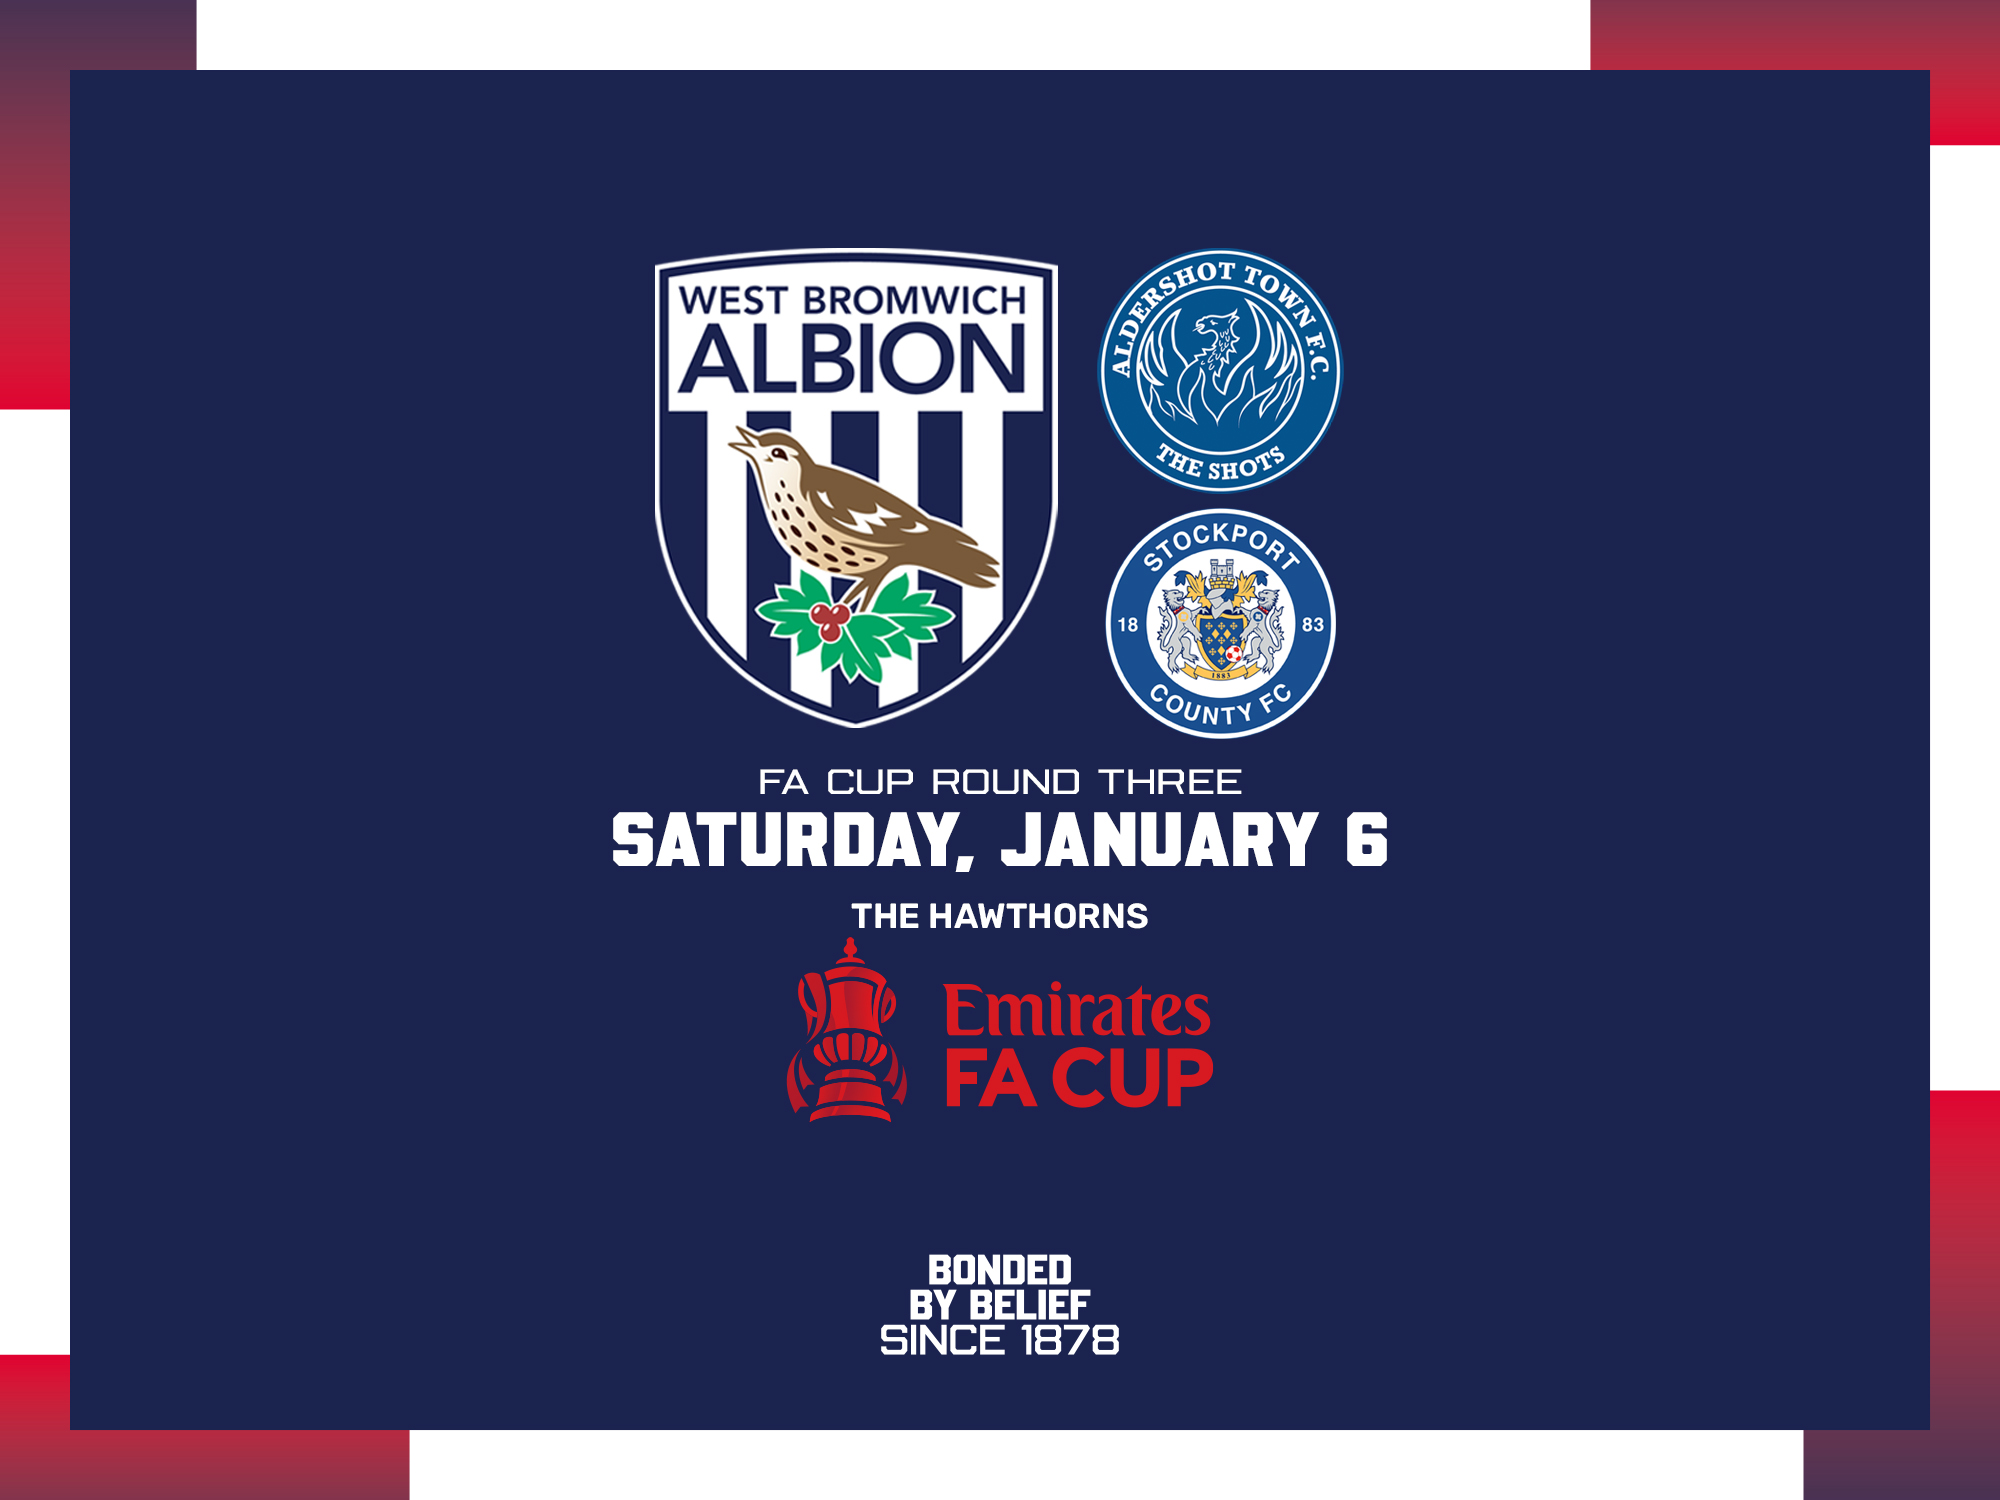 An graphic displaying information for Albion's Third Round FA Cup game against Aldershot or Stockport